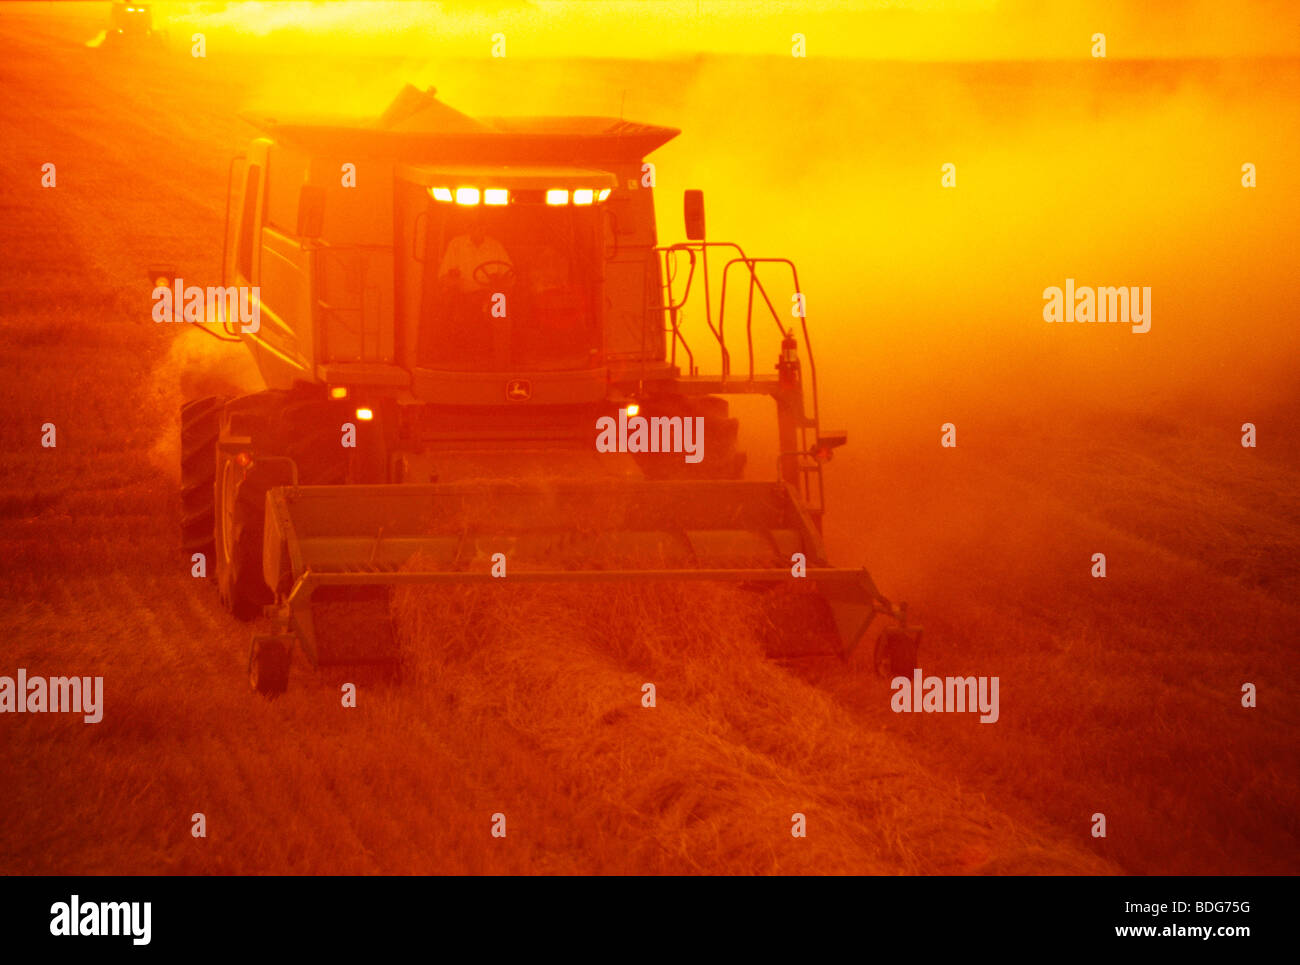 Agriculture - A combine harvests mature swathed wheat in late summer at sunset / near Dugald, Manitoba, Canada. Stock Photo